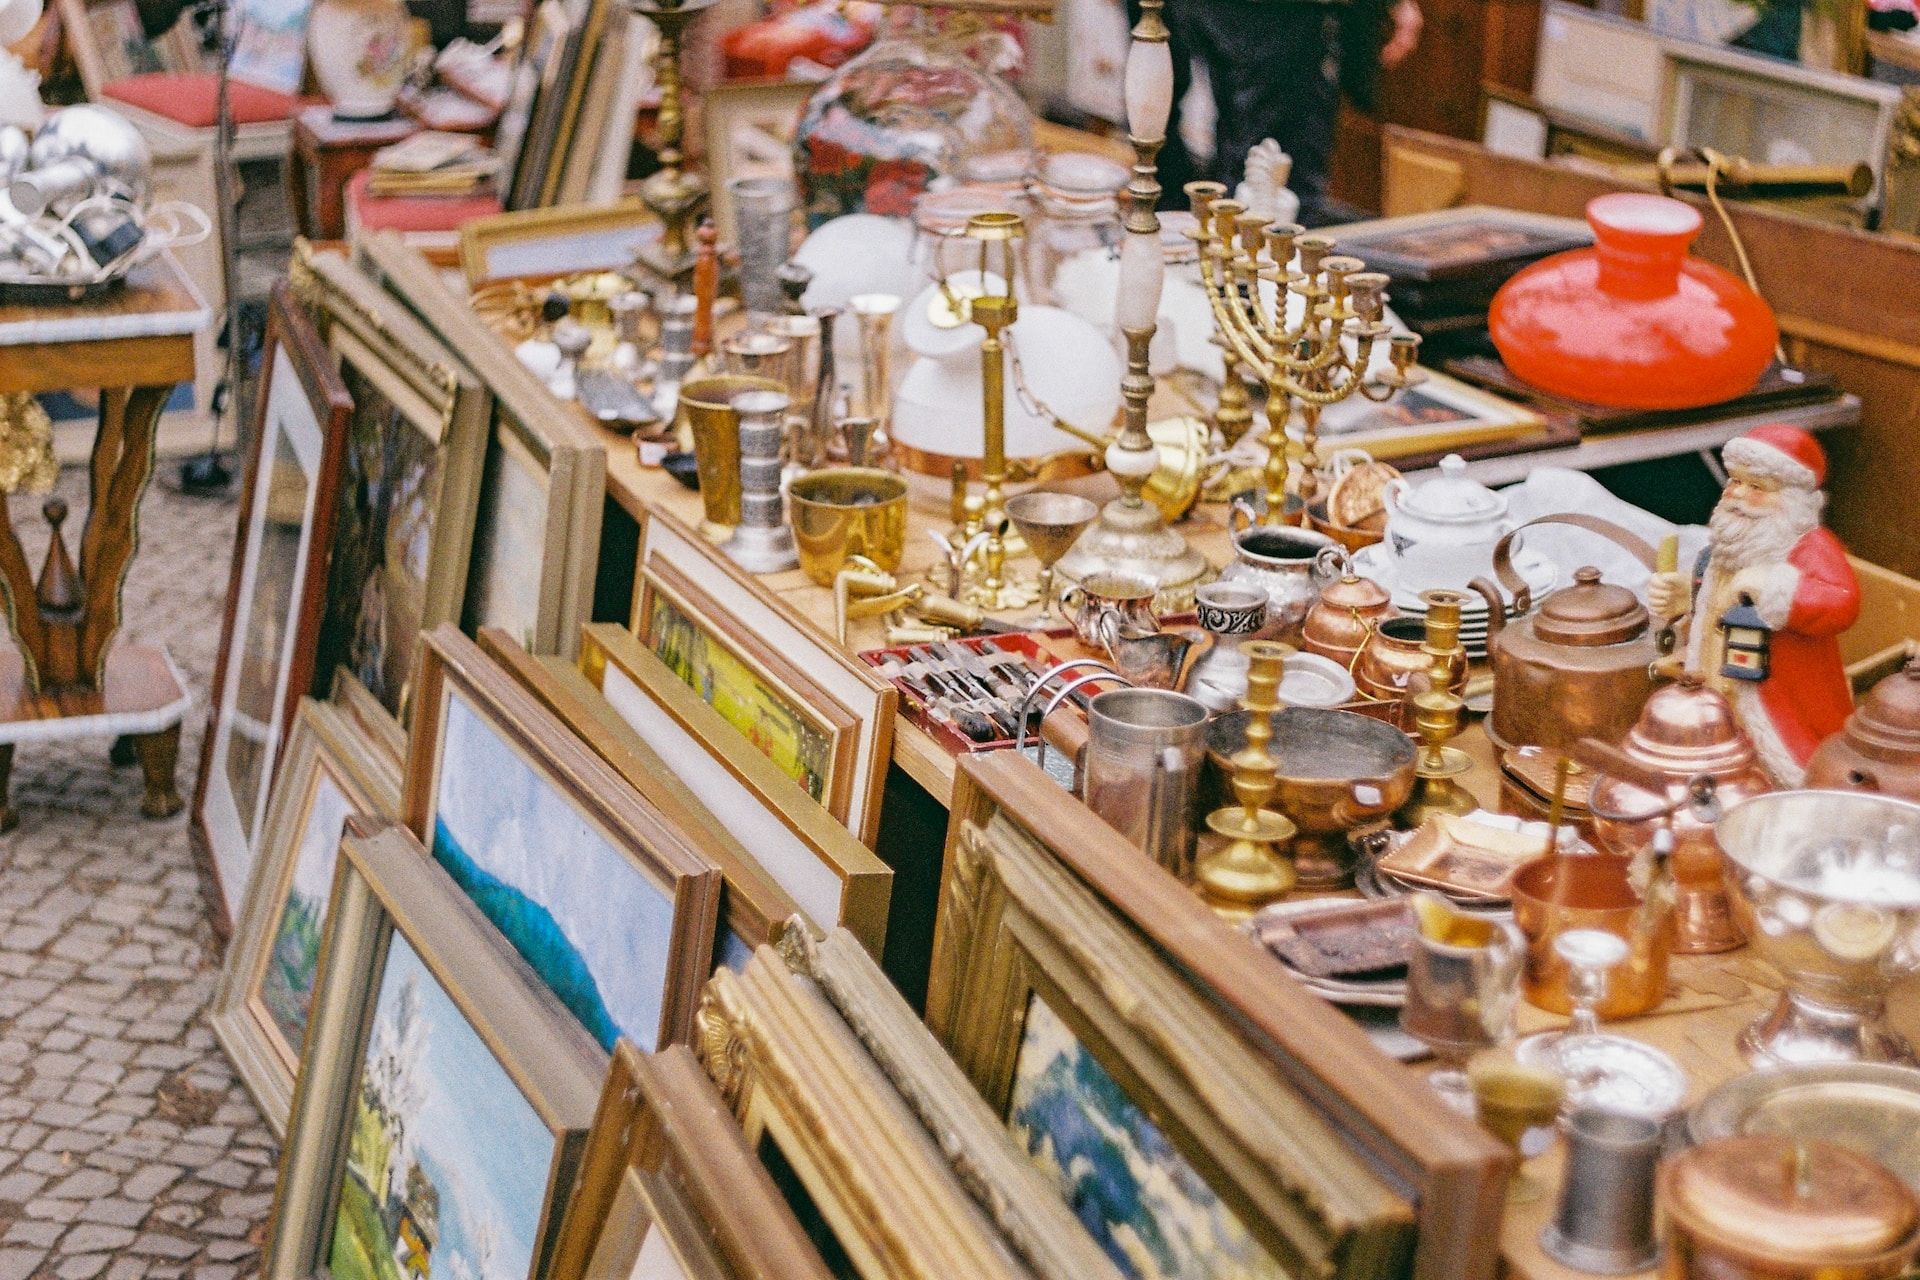 Antiques and paintings in a flea market